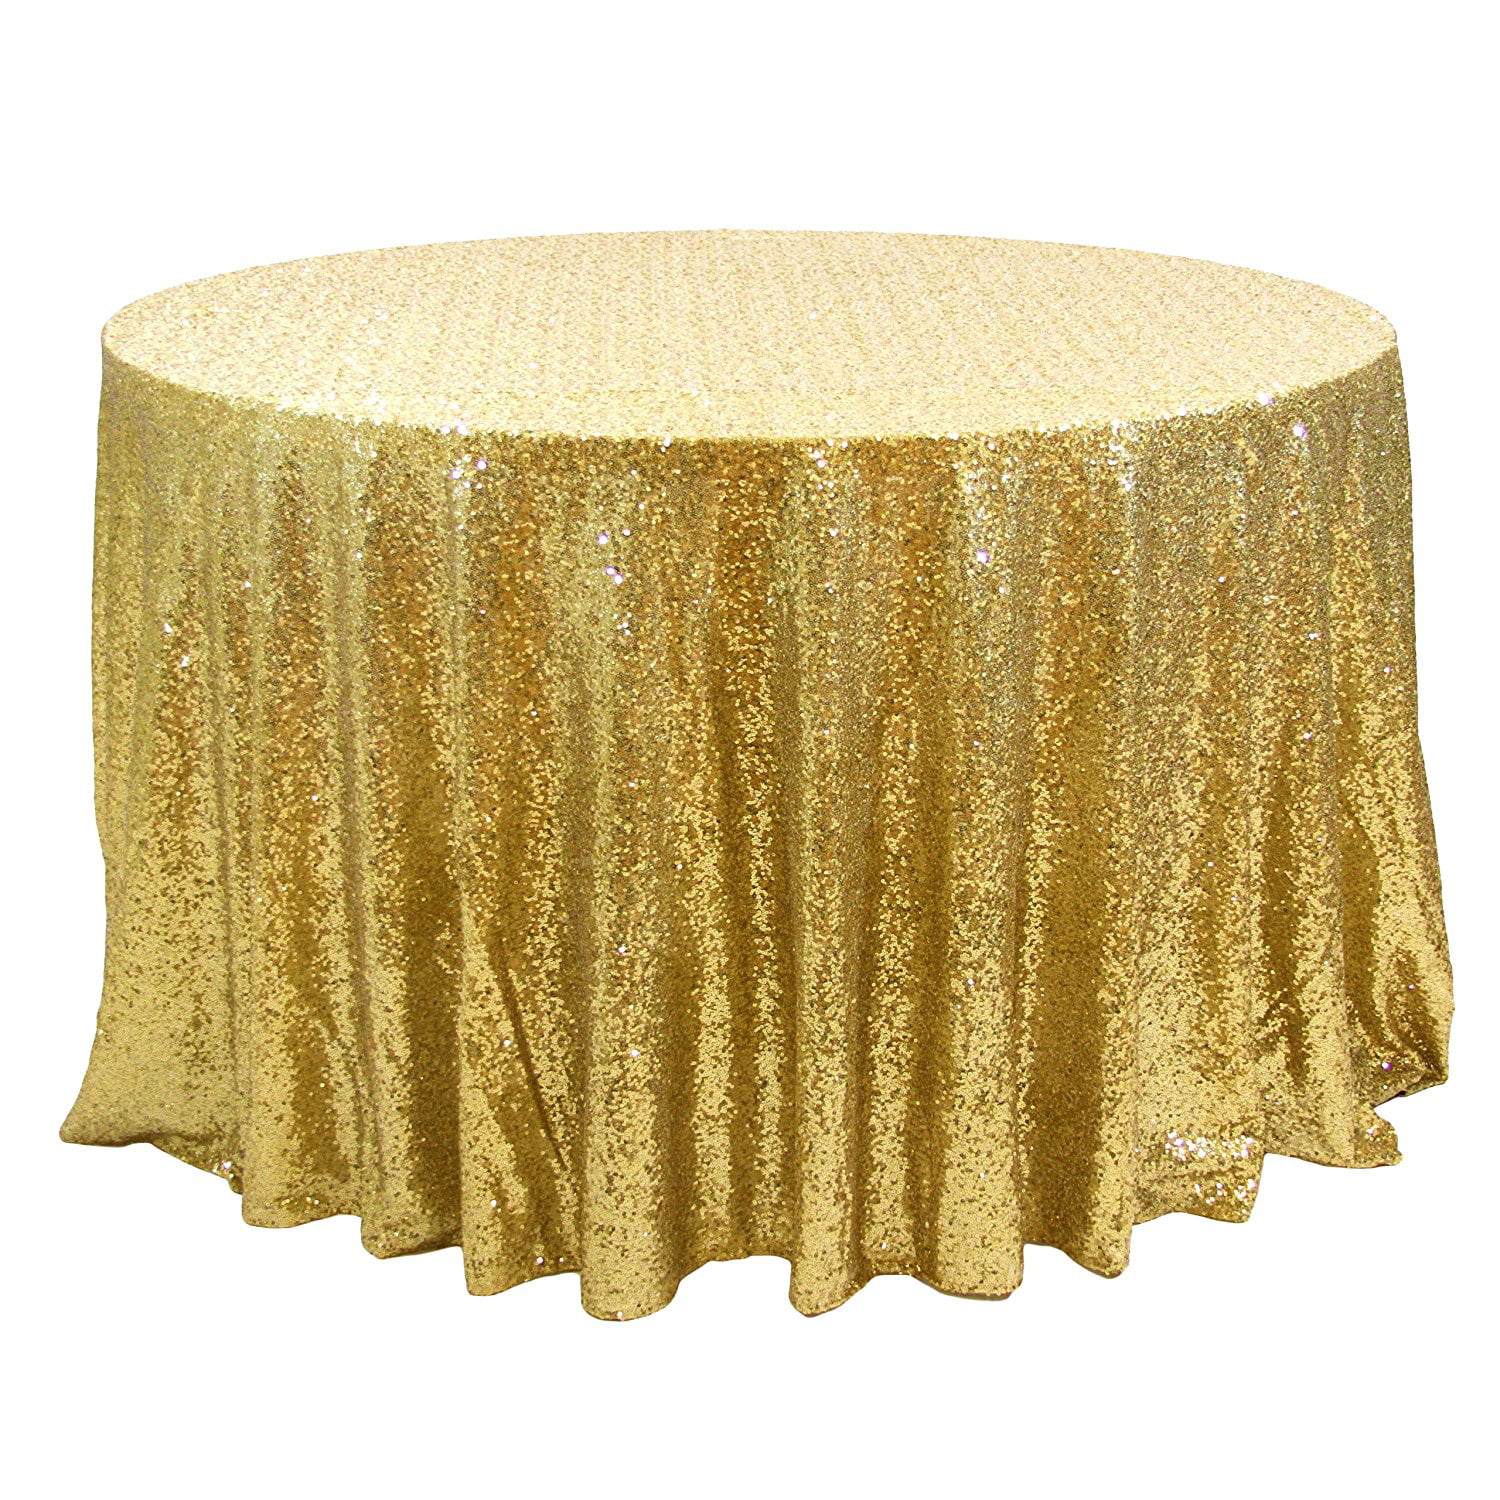 Sparkly Round Sequin Tablecloth, 120 Inch Round Tablecloth Bulk